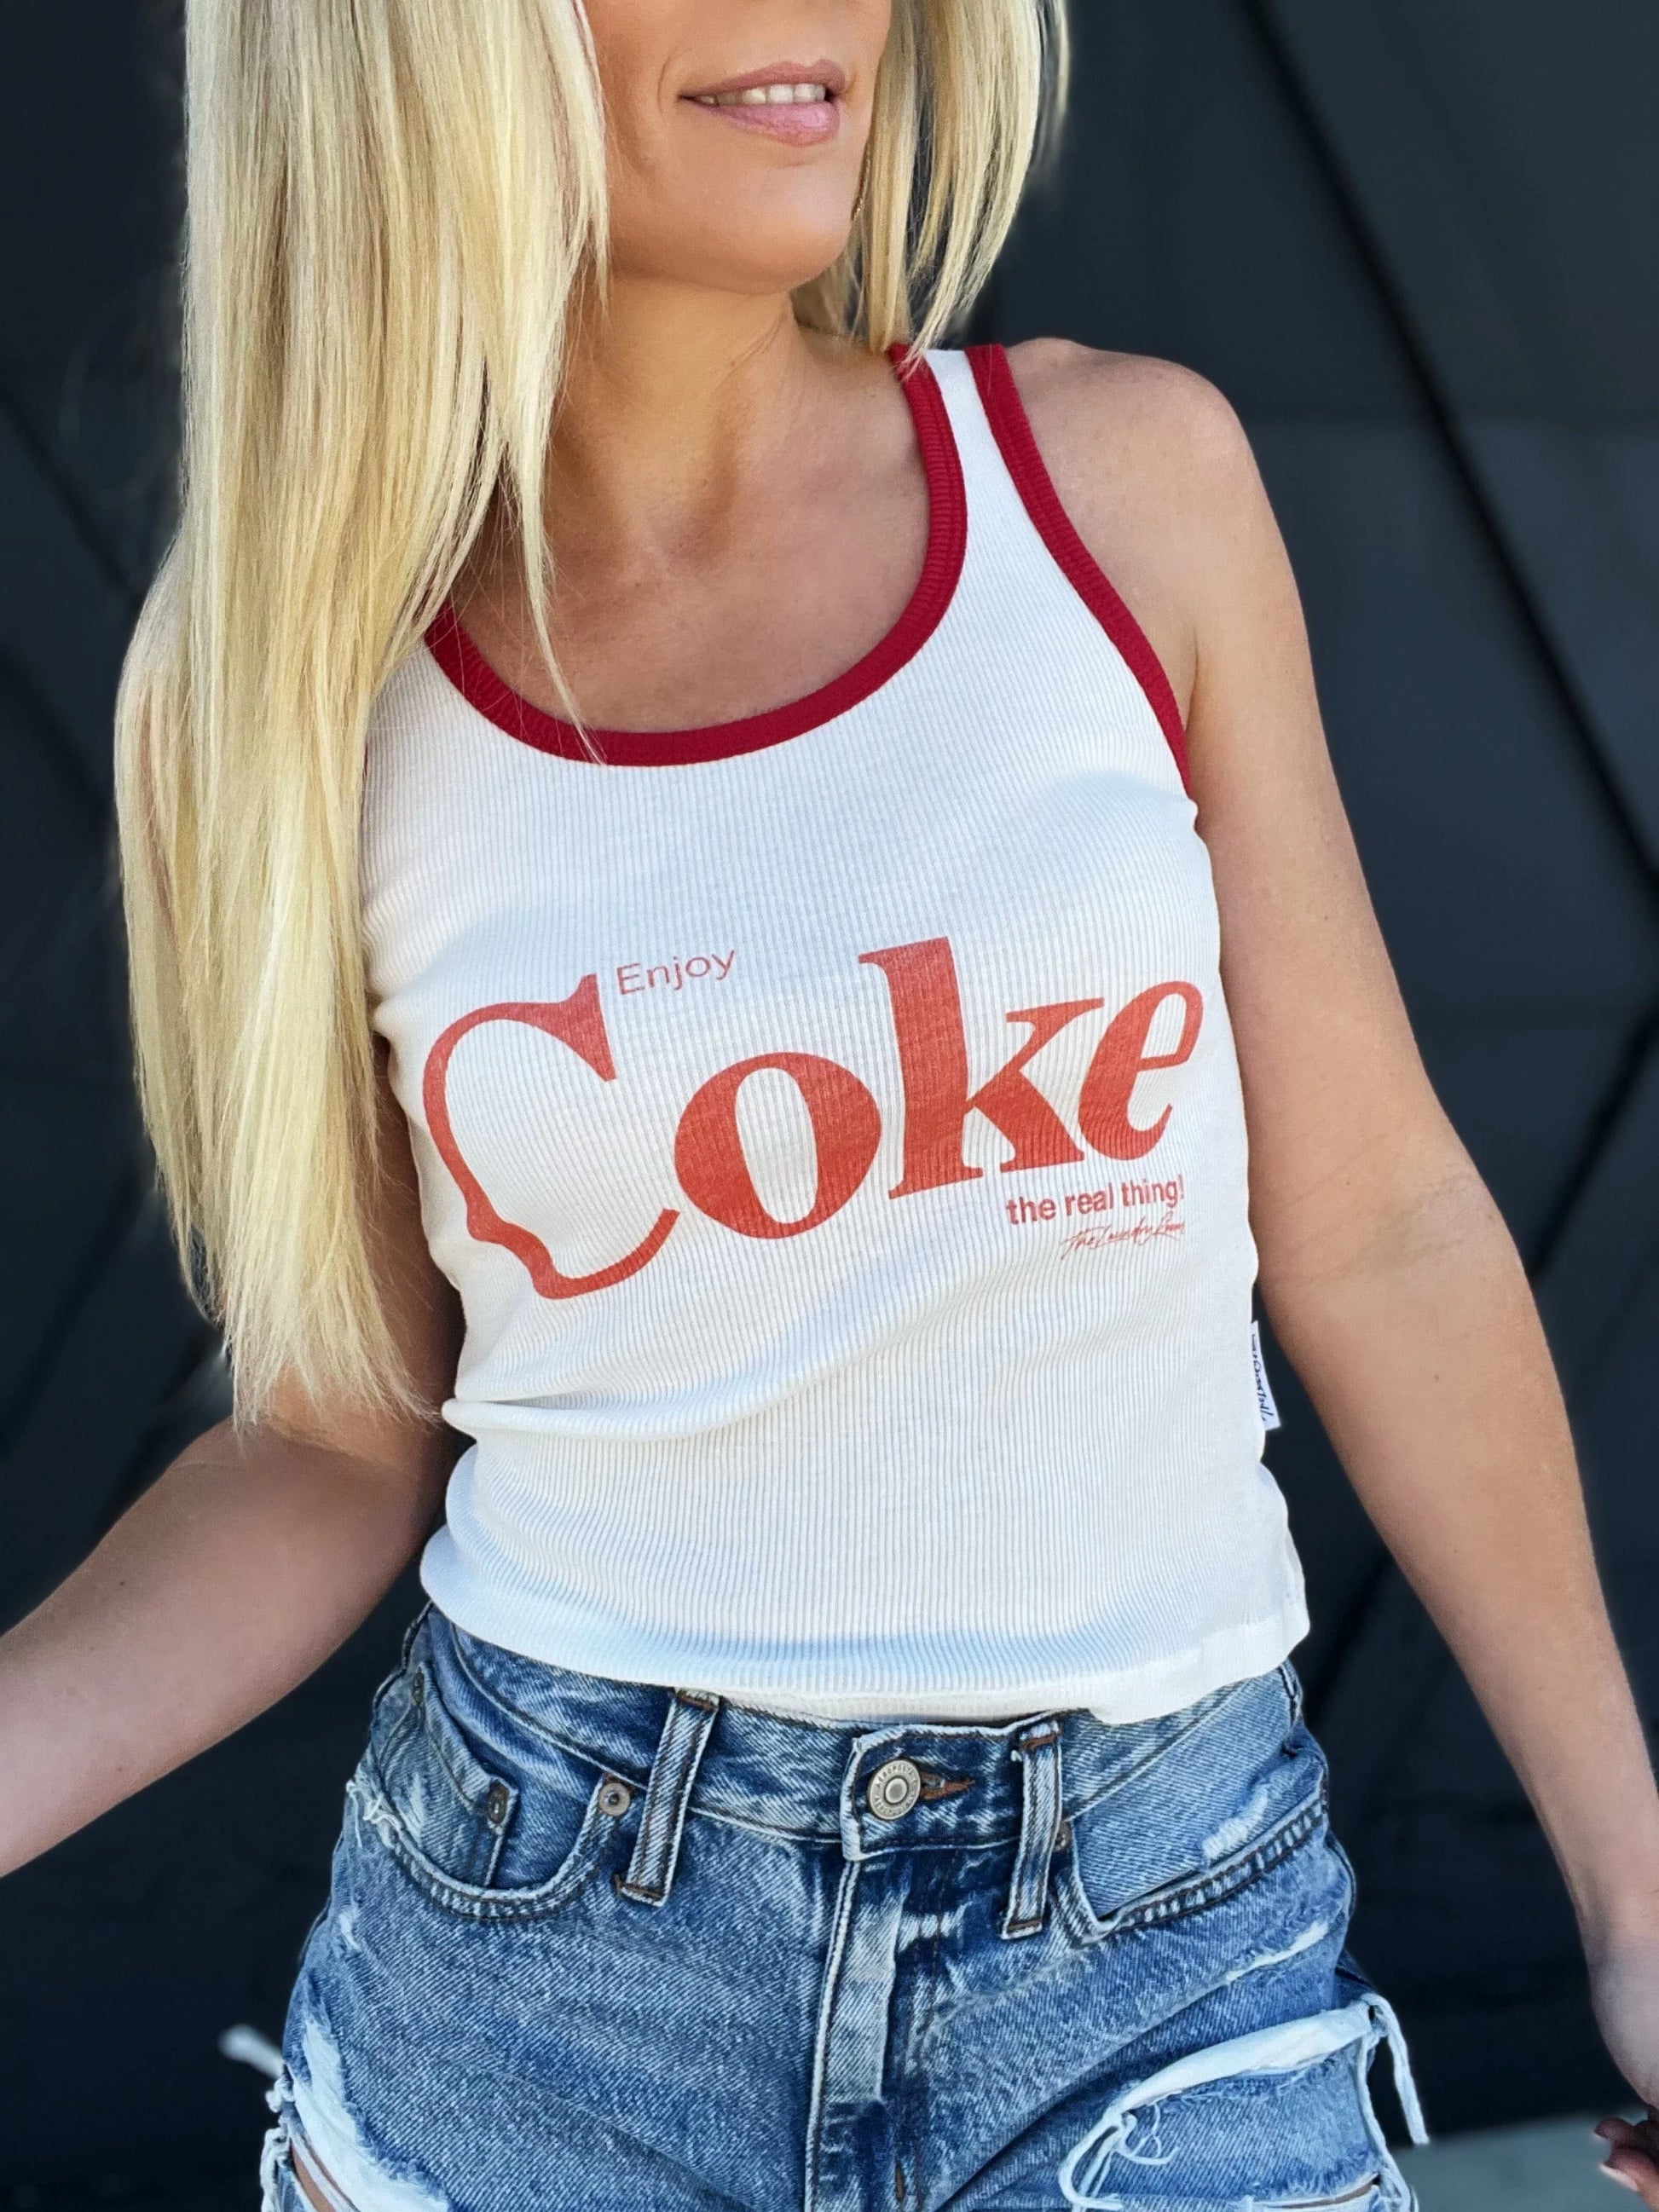 THE LAUNDRY ROOM: ENJOY COKE TANK (front view ion model)